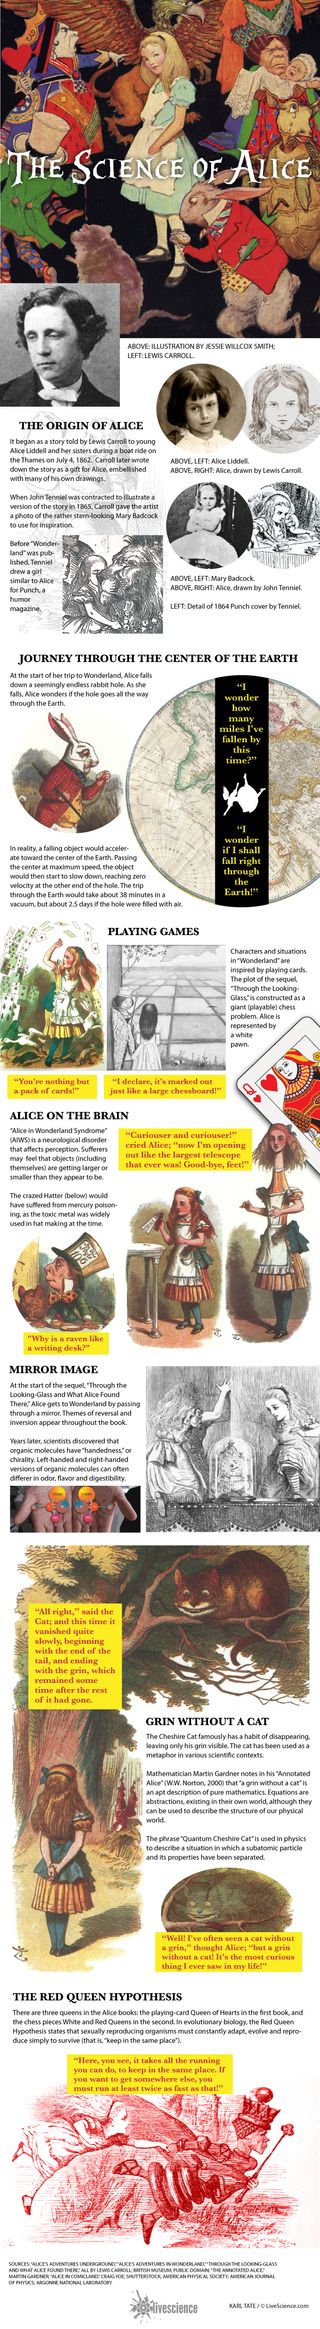 2015 is the 150th anniversary of the publication of Lewis Carroll's children's fantasy book. [See full infographic]